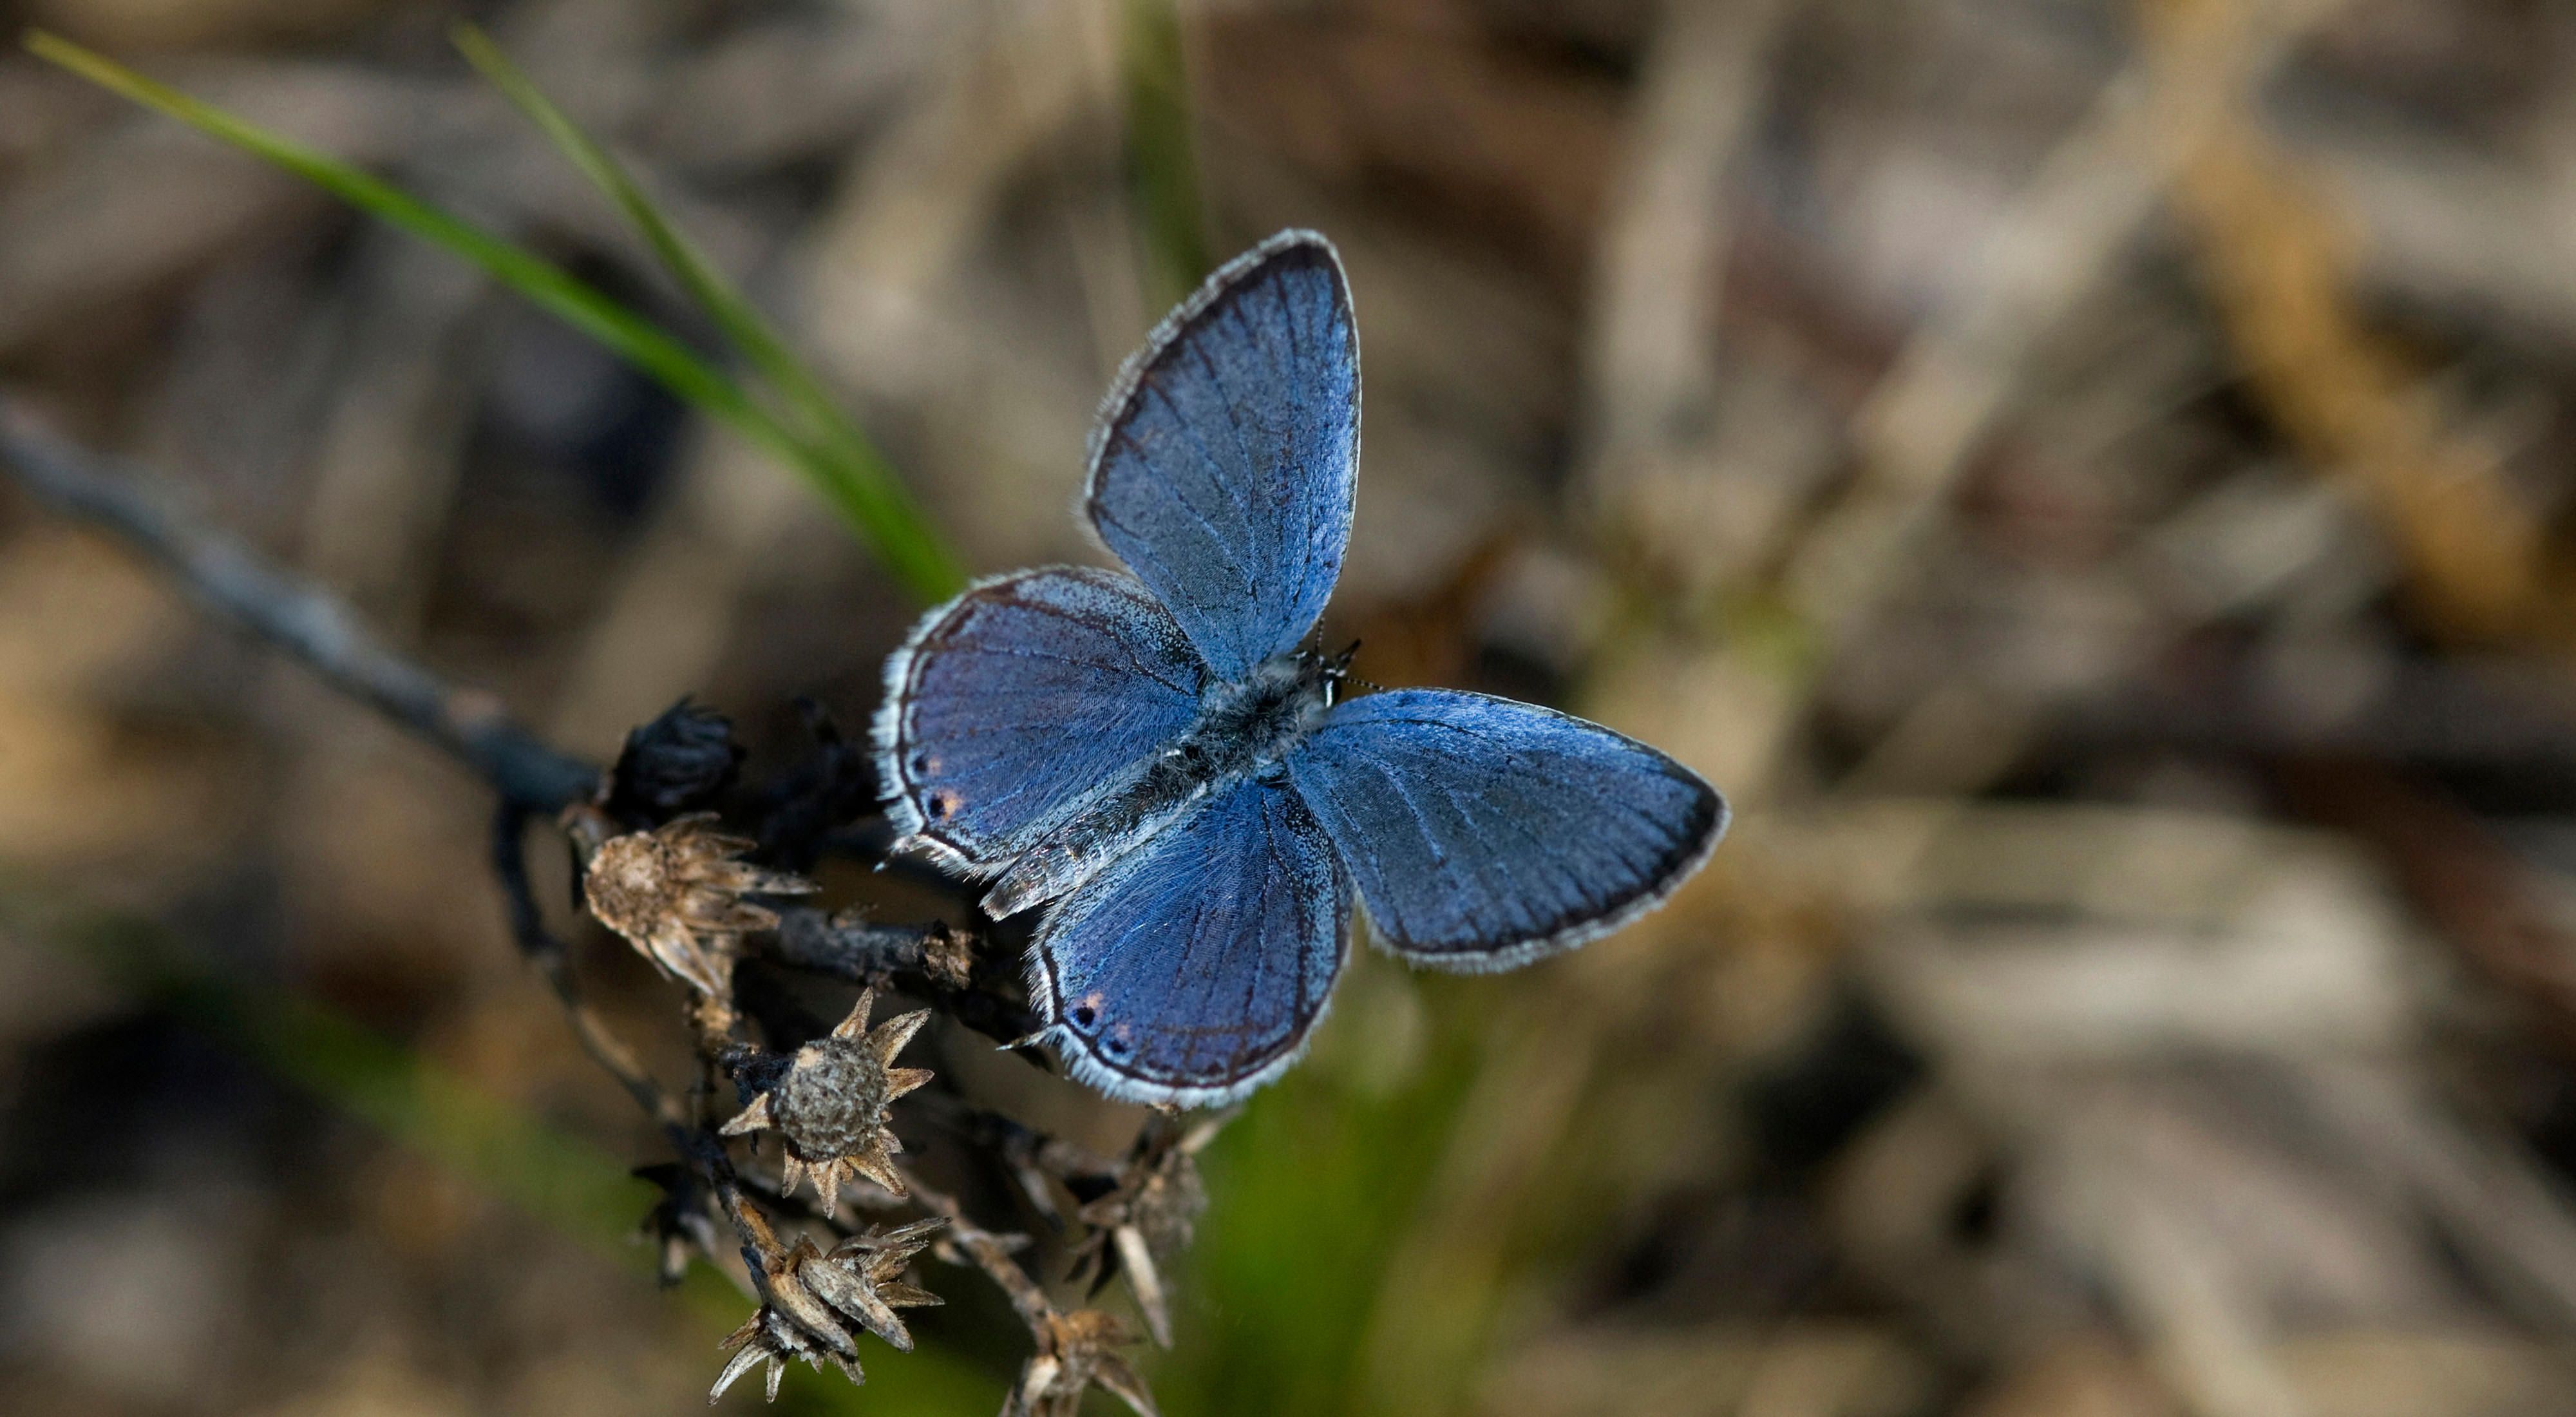 Closeup of a blue butterfly in native habitat at Kankakee Sands.